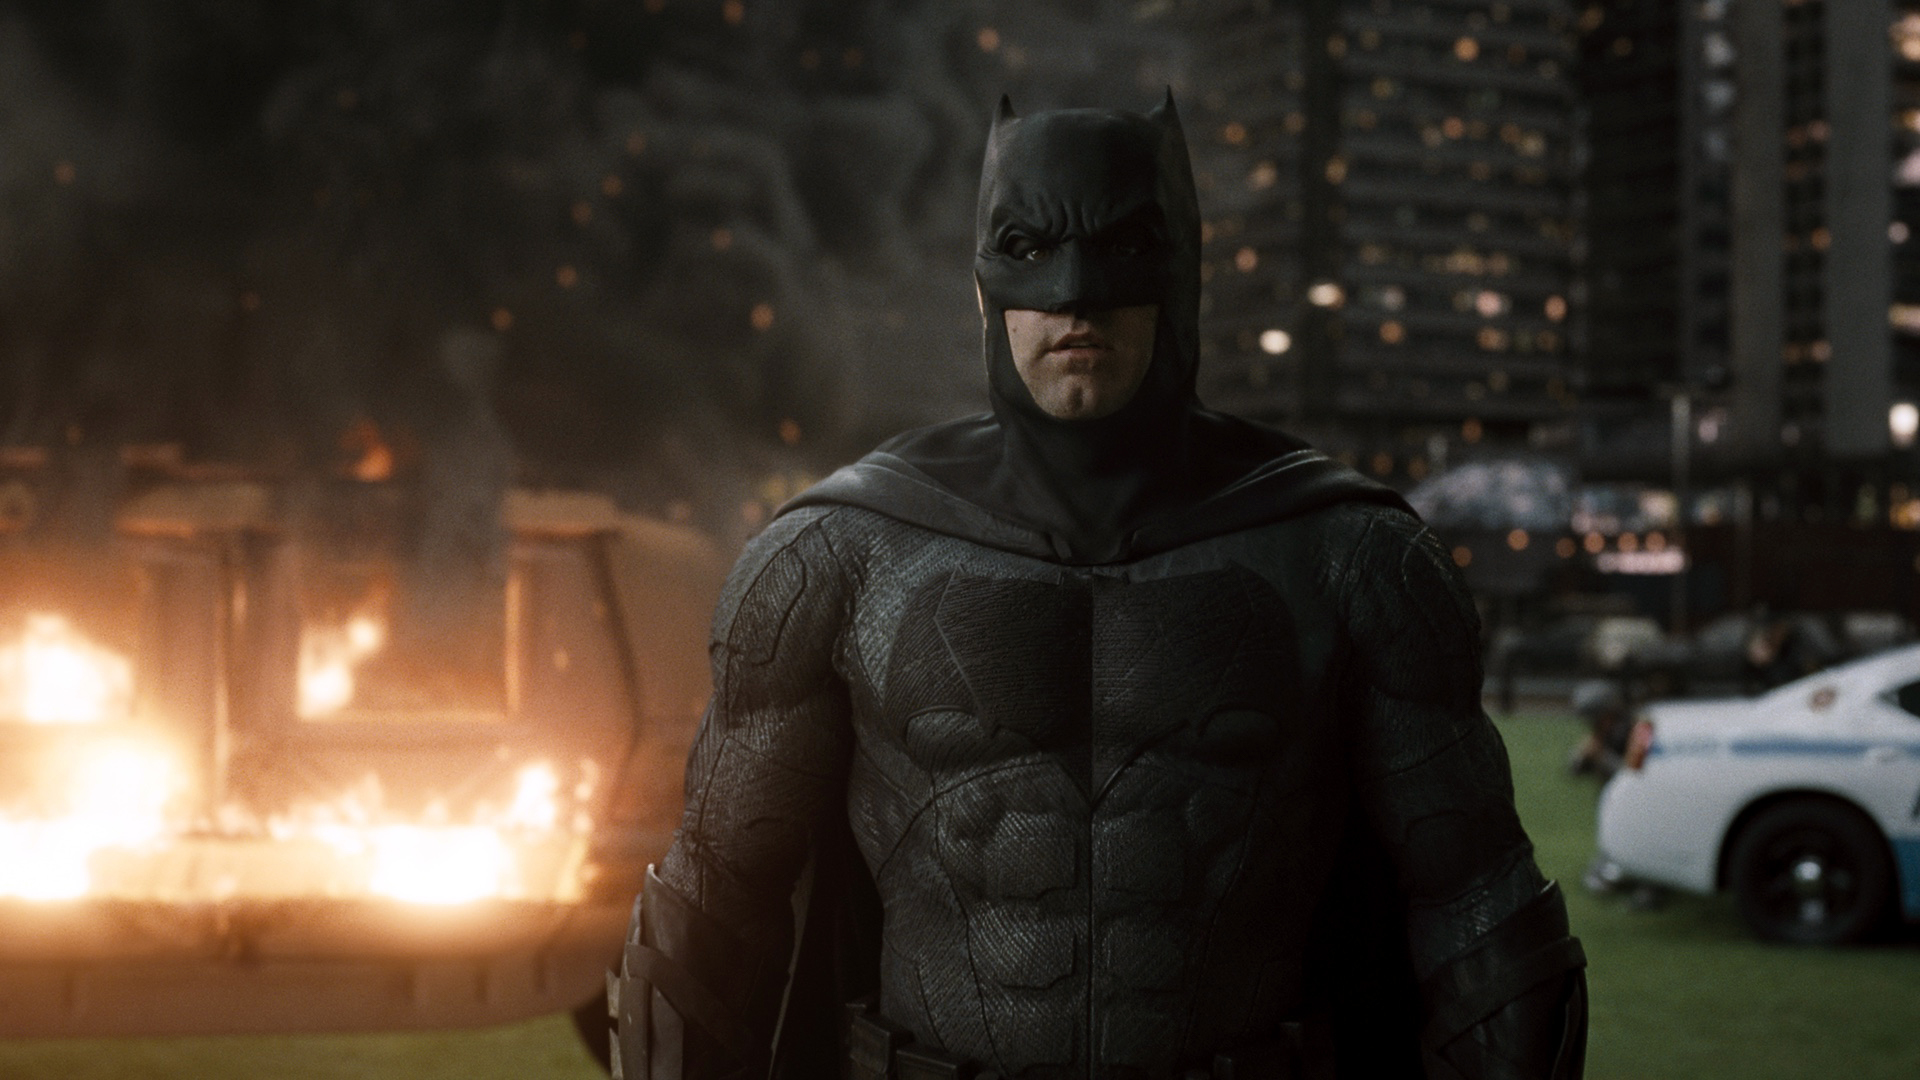 Batman movies in order: How and where to watch all the Batman movies online  | Tom's Guide